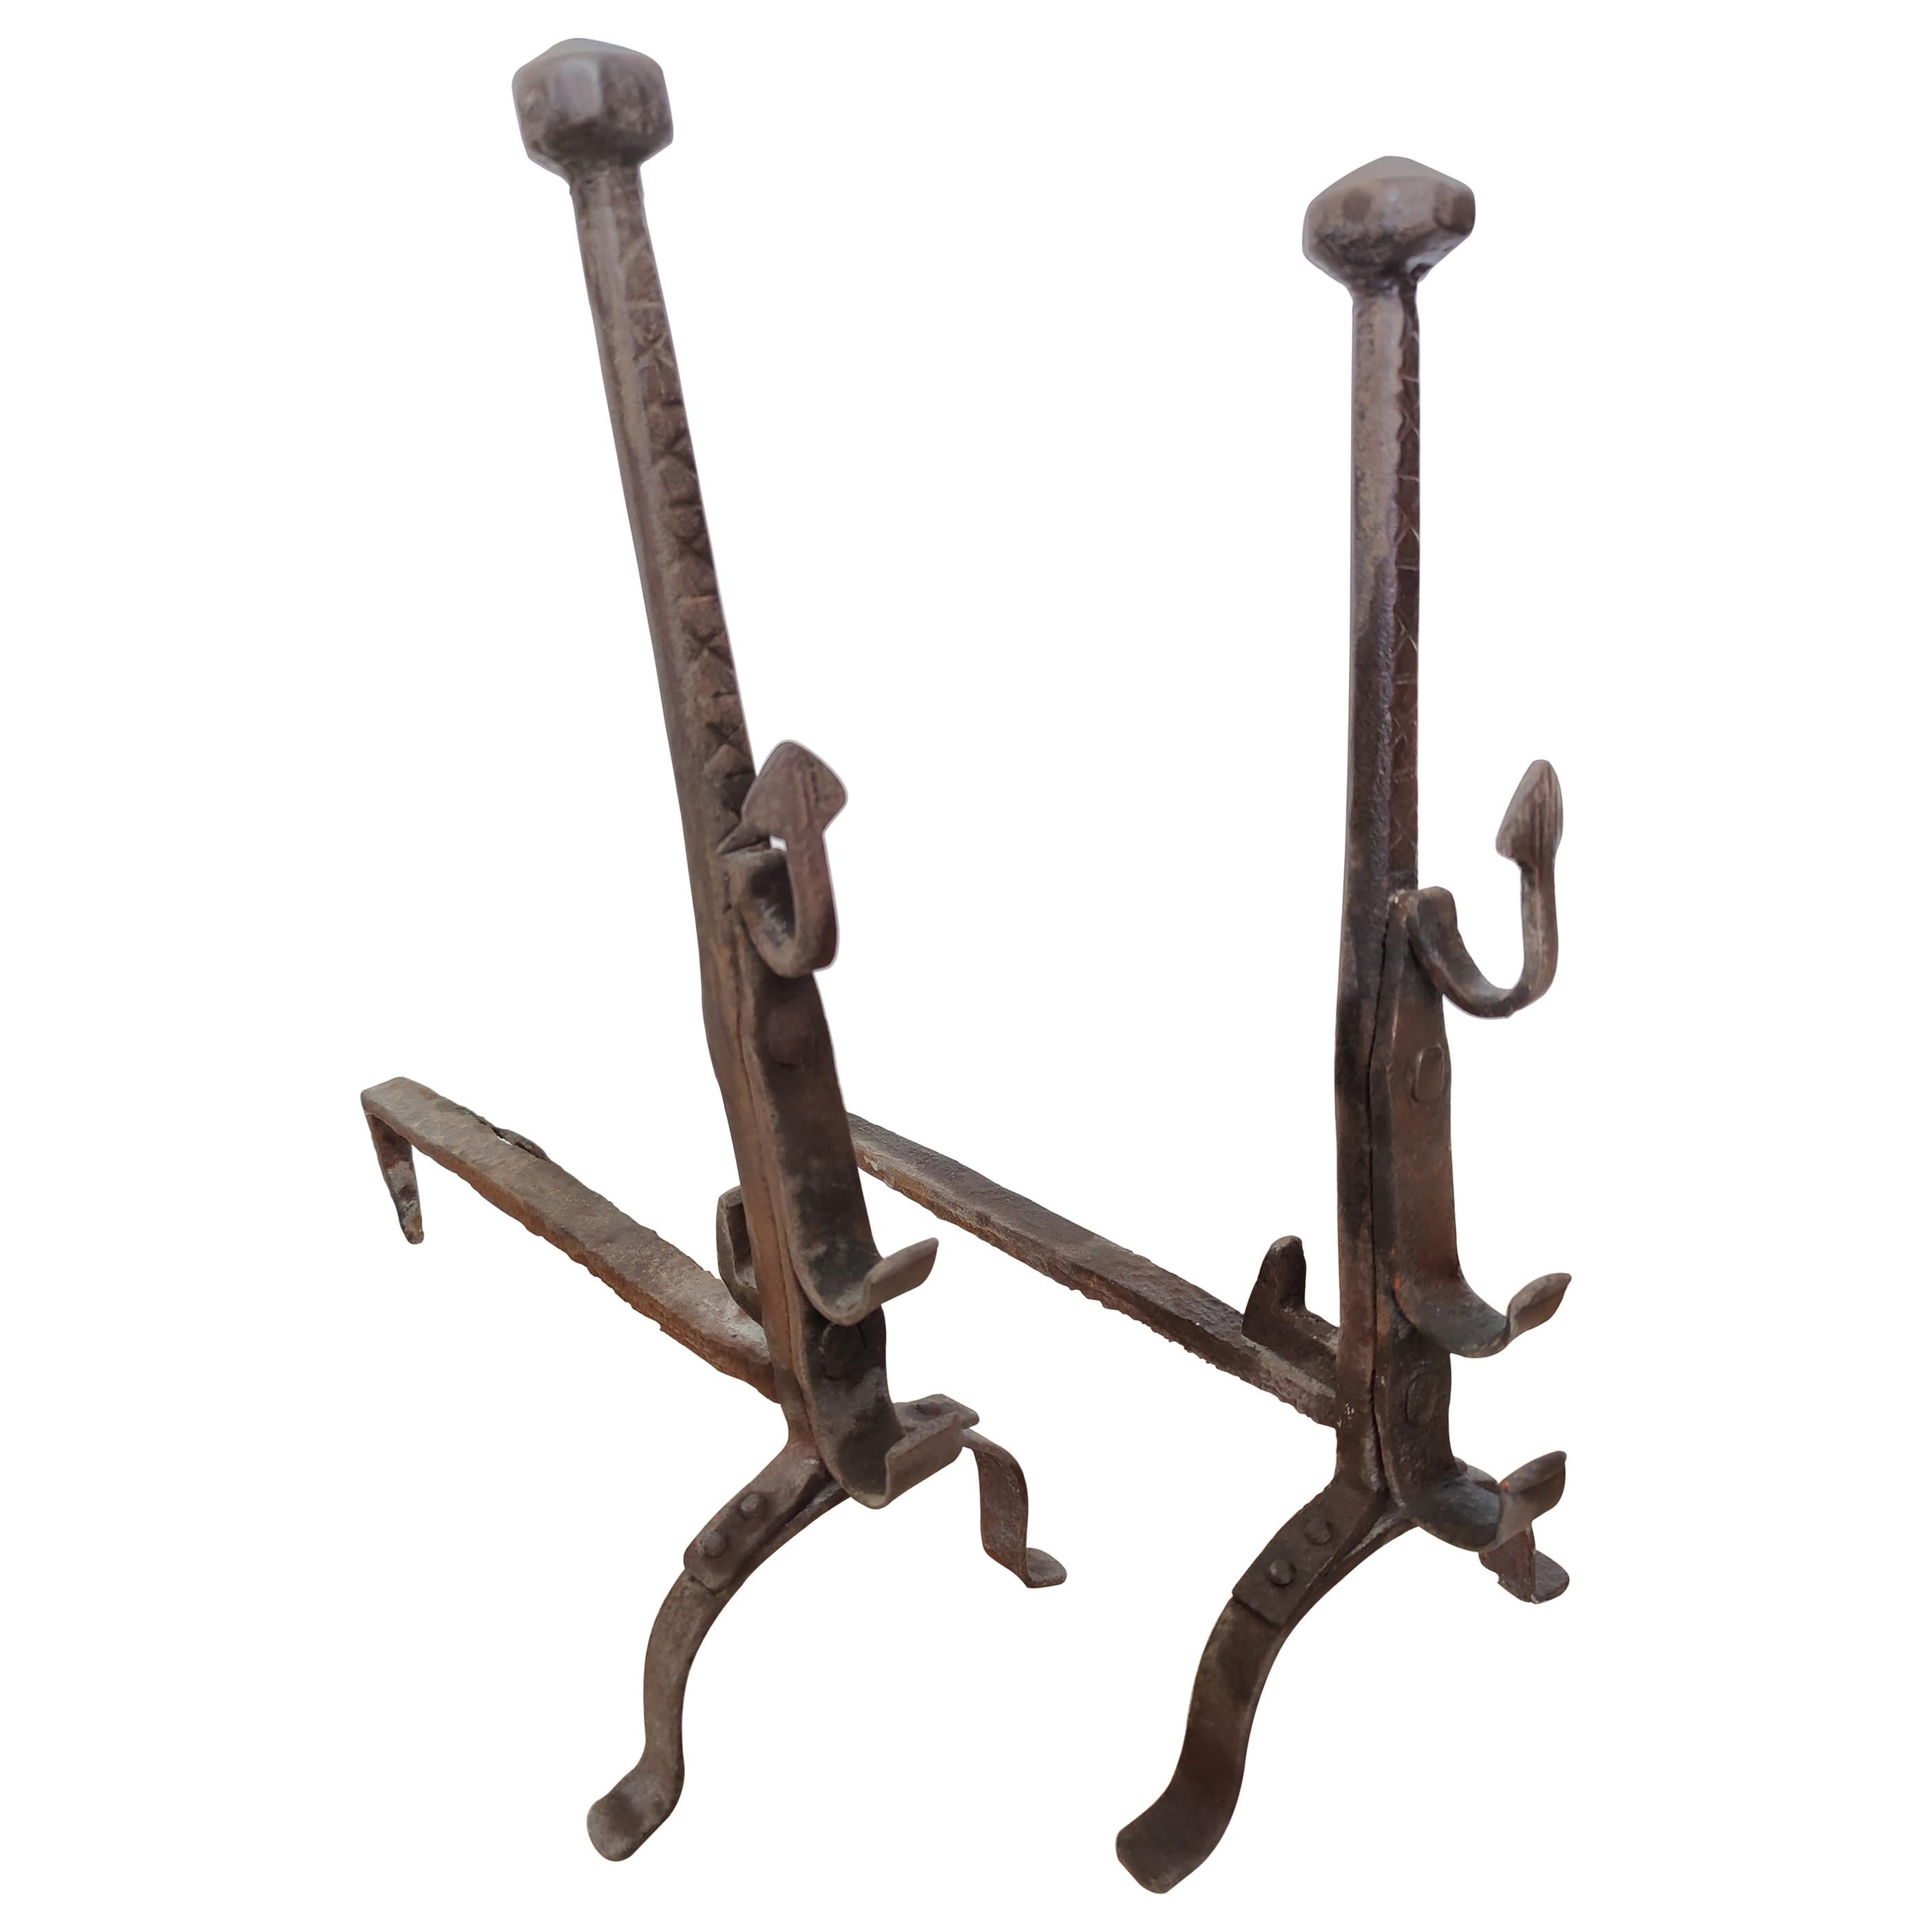 Beautiful Tough Wrought Iron Andirons or Fire Dogs